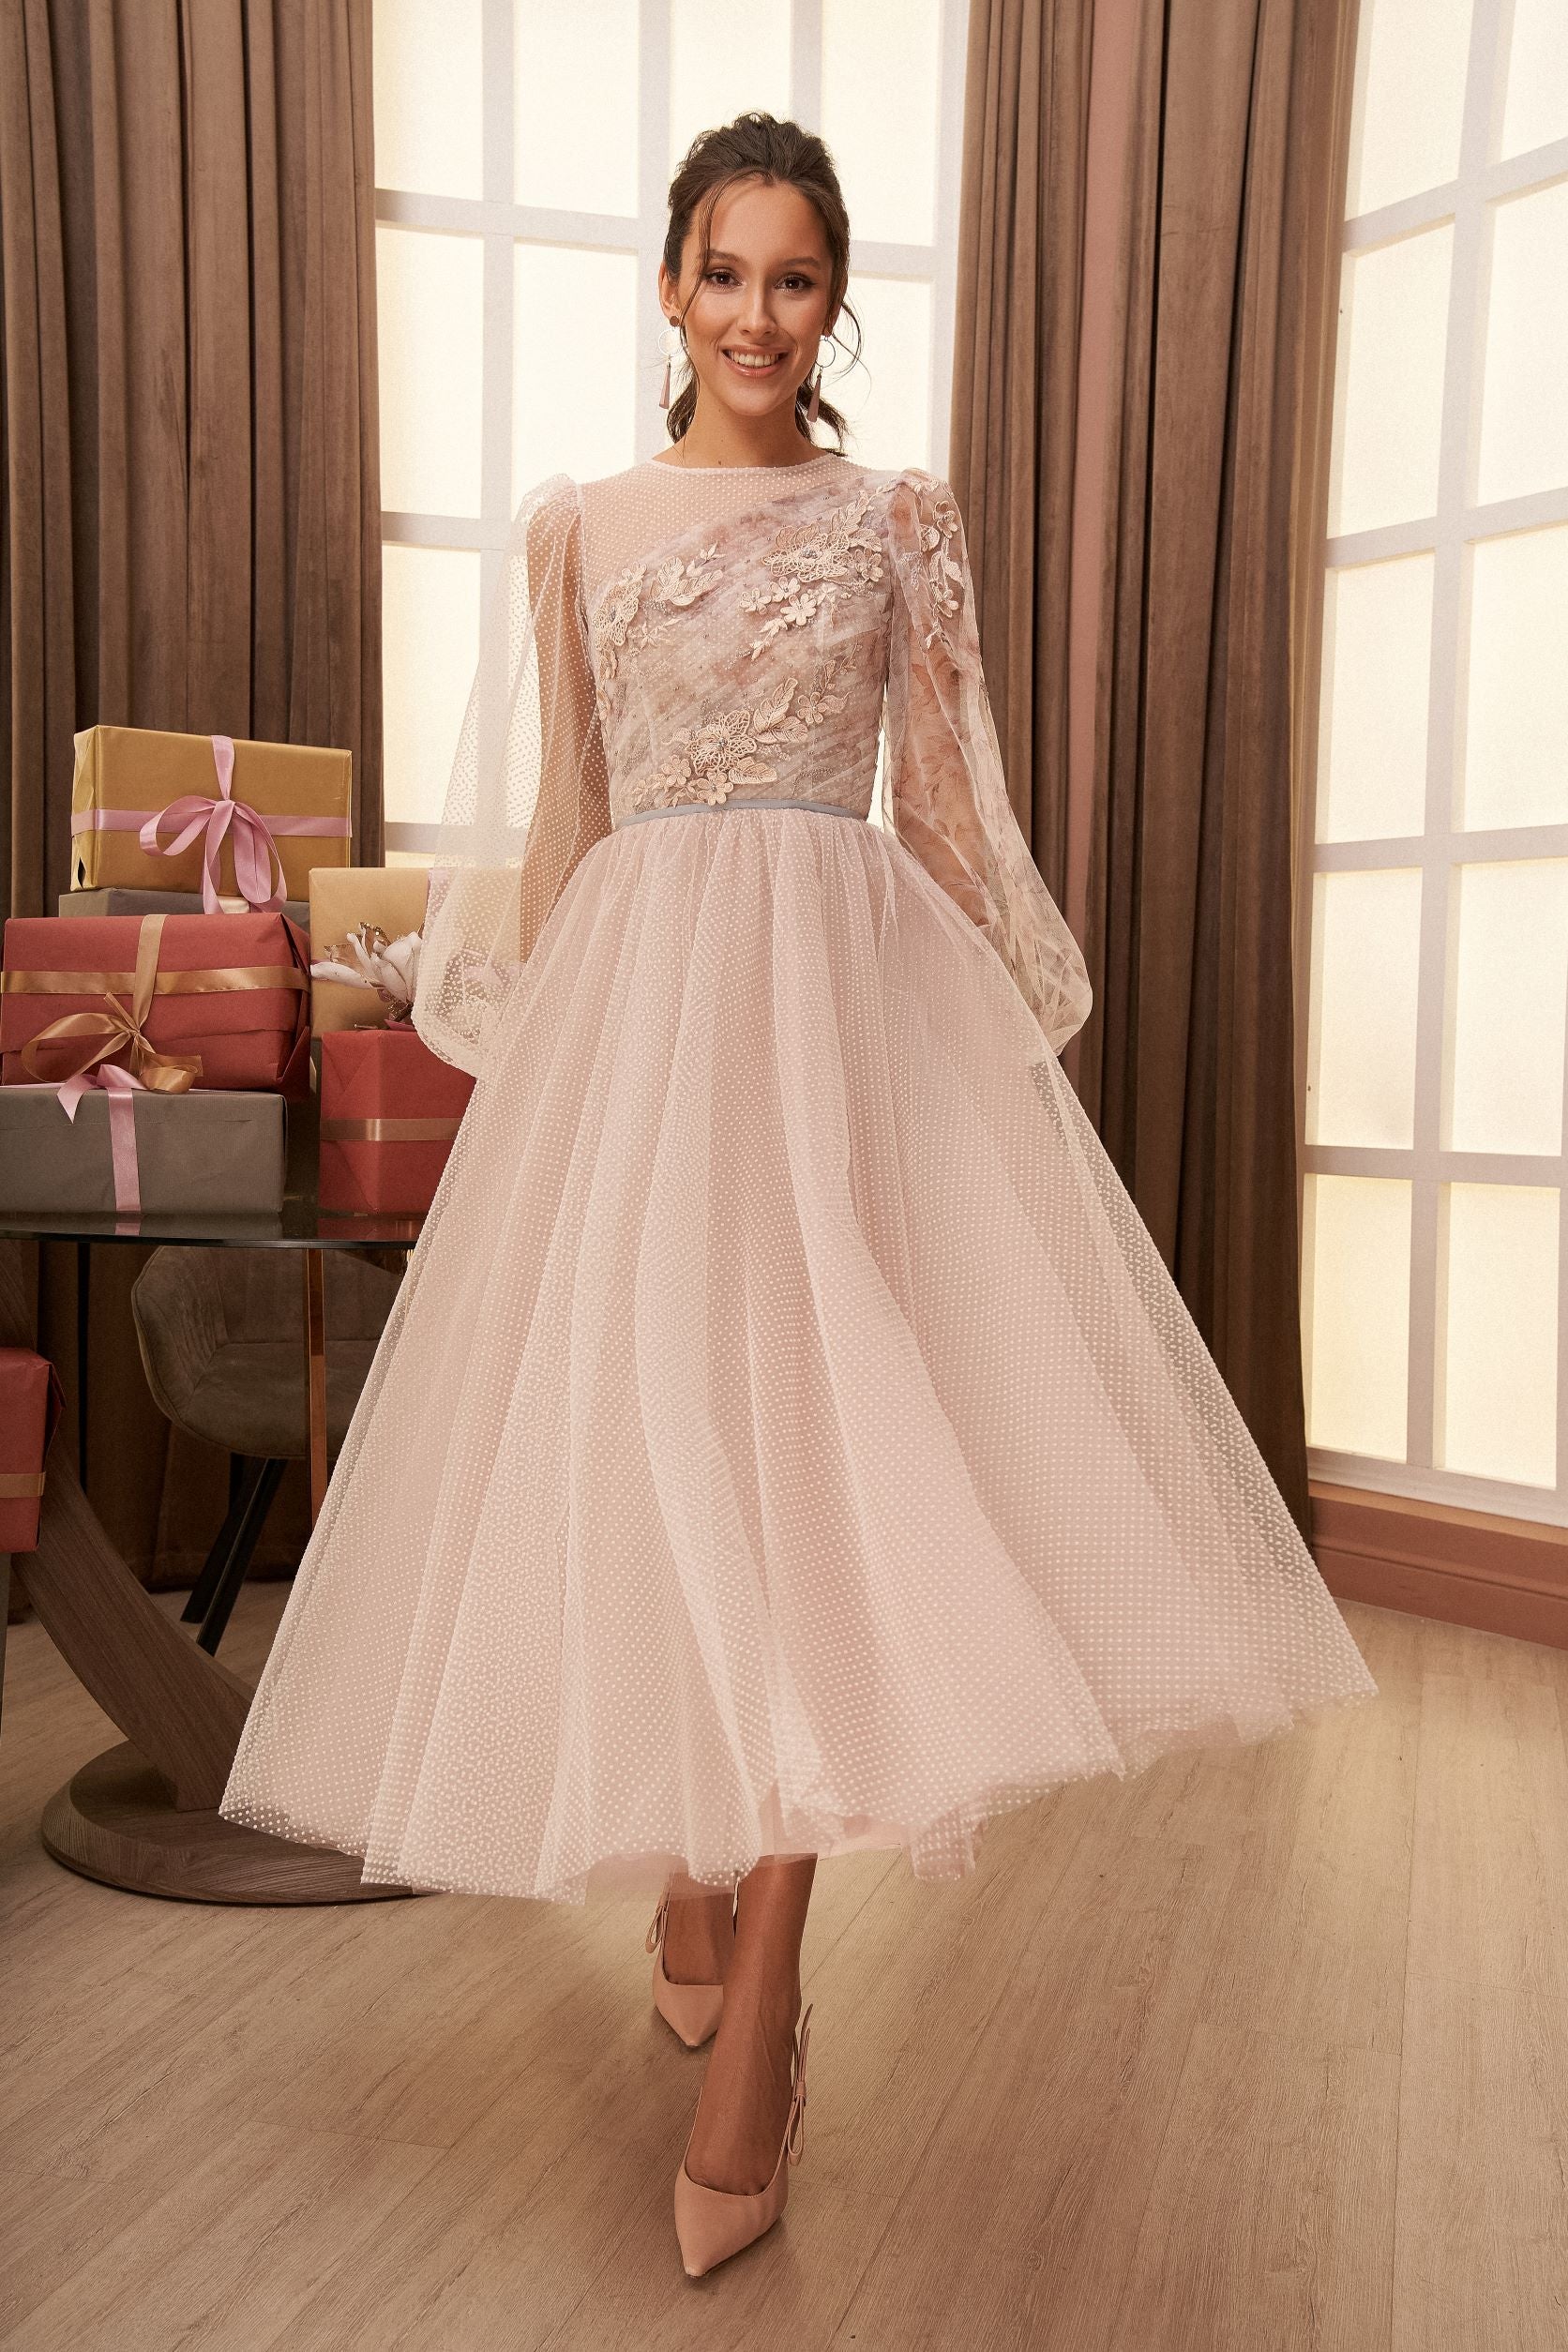 Wedding gown | Indian wedding gowns, Bridal gown inspiration, Cocktail gowns